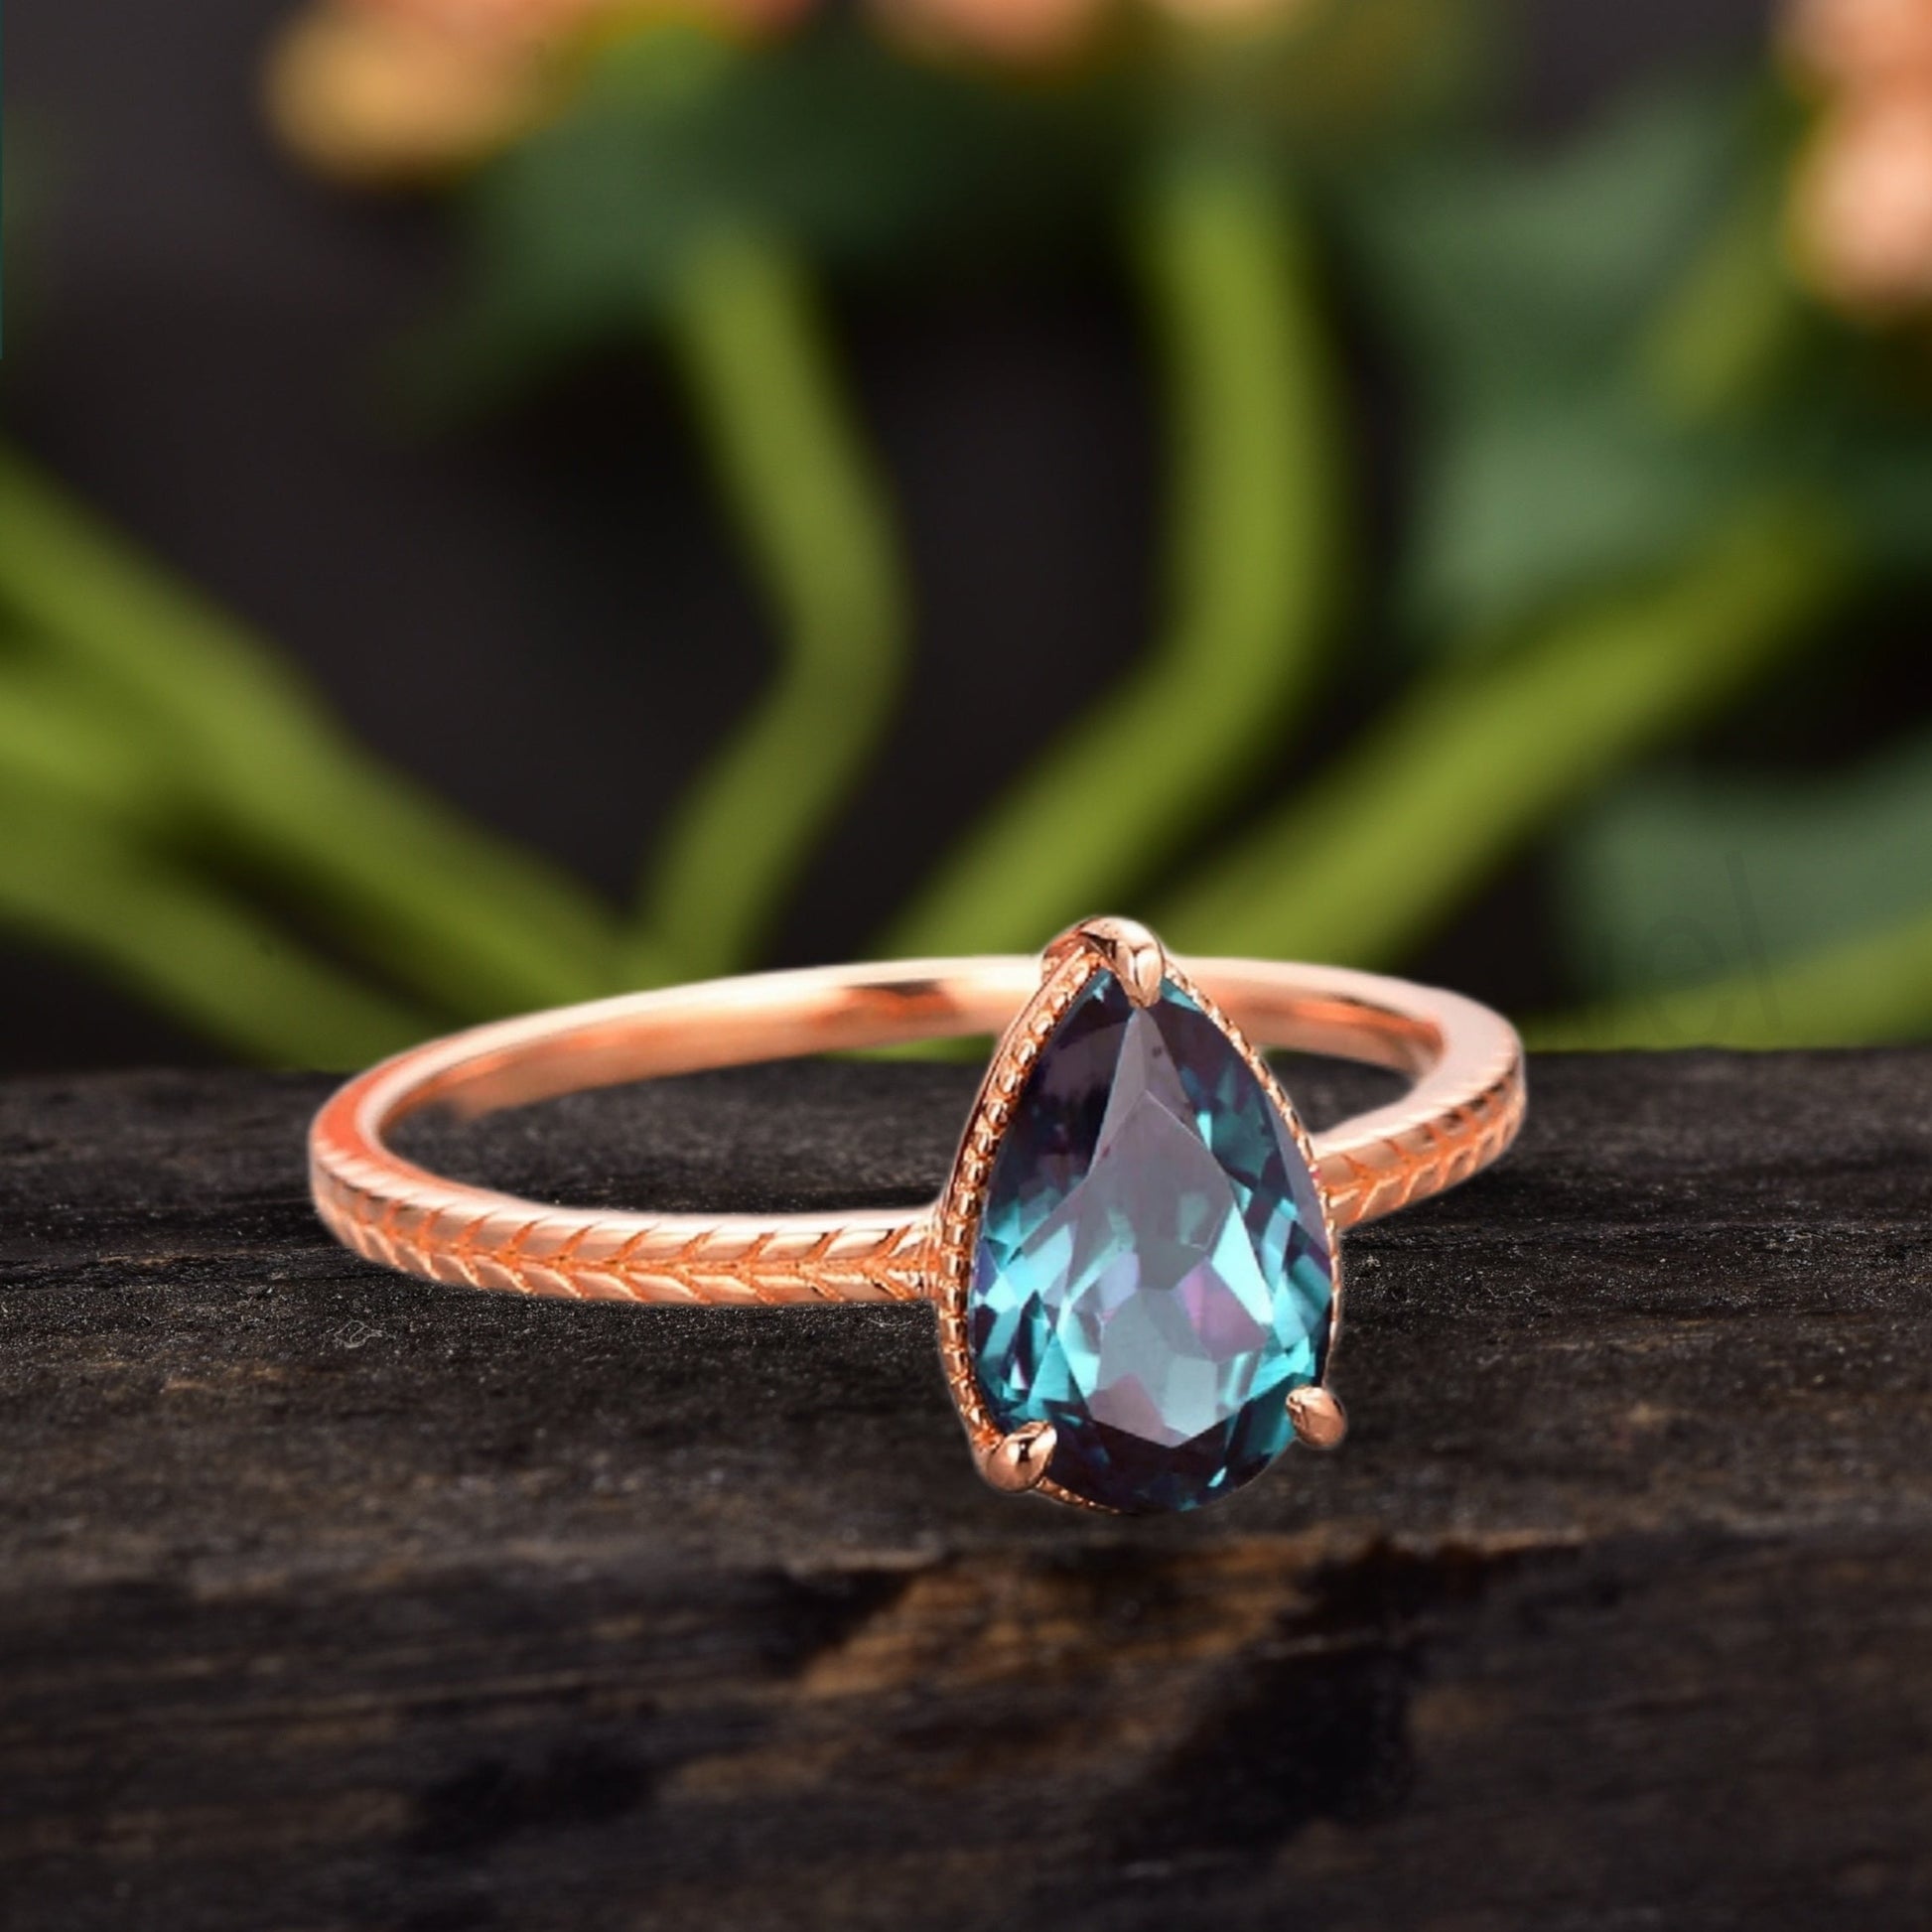 Pear Shaped Alexandrite Engagement Ring 